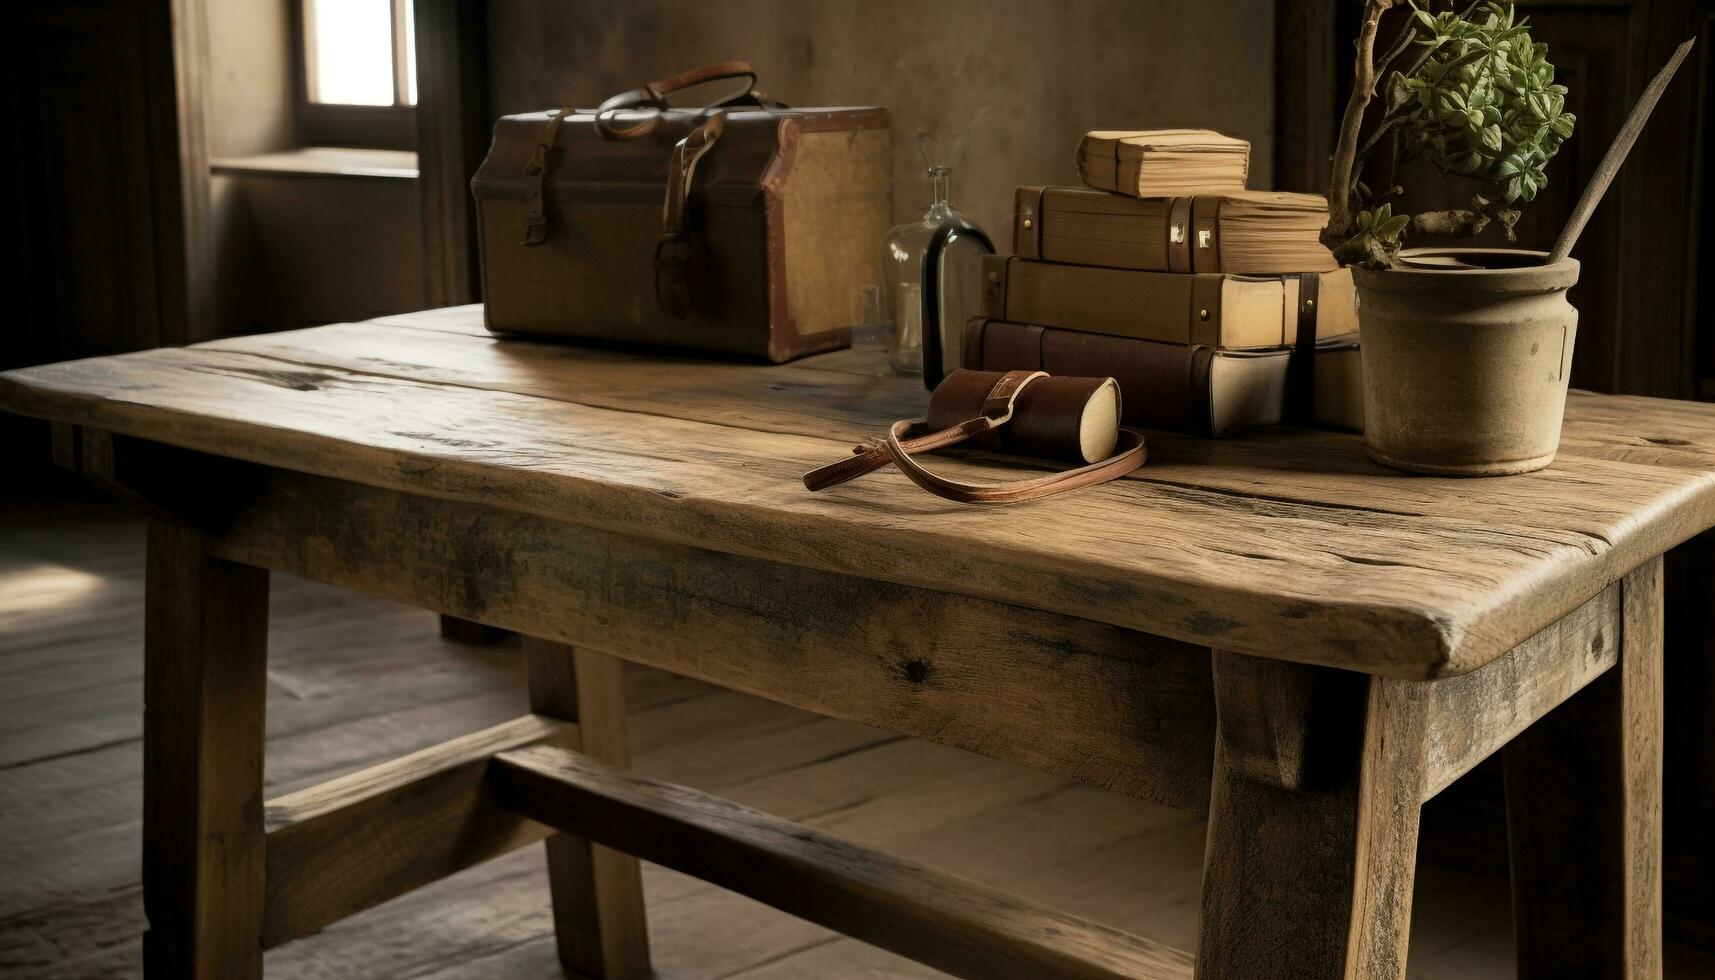 Rustic wooden box stacks on table, a vintage home decoration generated by AI photo